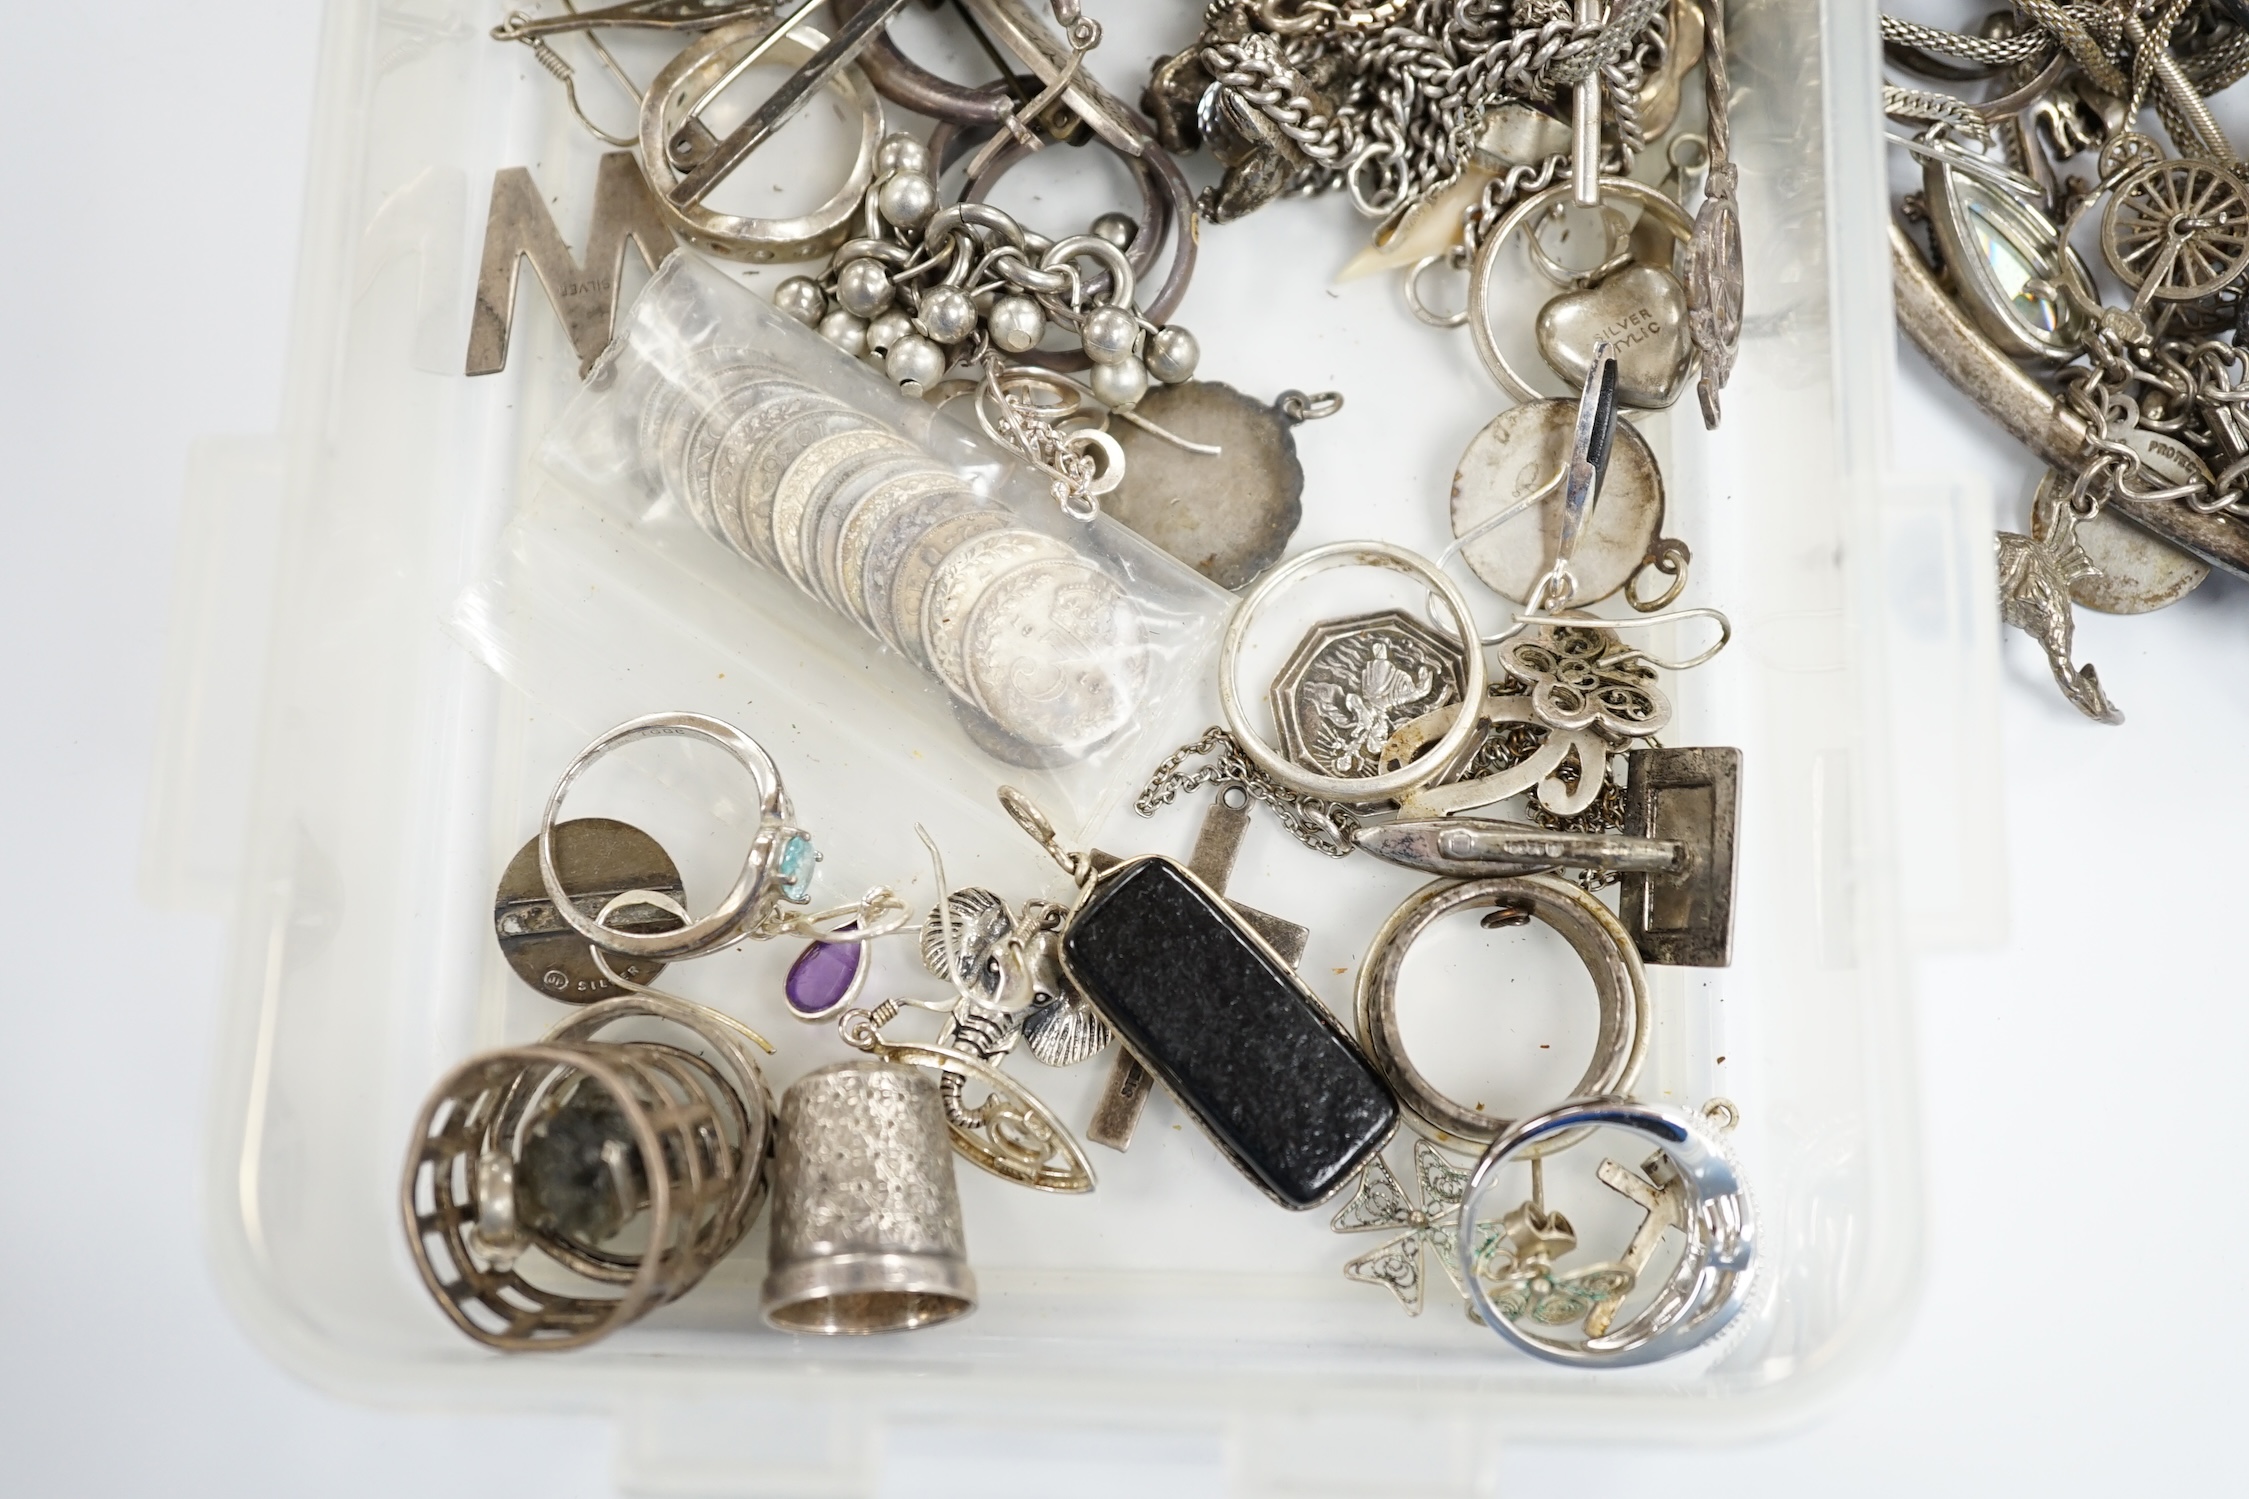 A quantity of assorted mainly silver, white metal and 925 jewellery including rings and bracelets and other items.